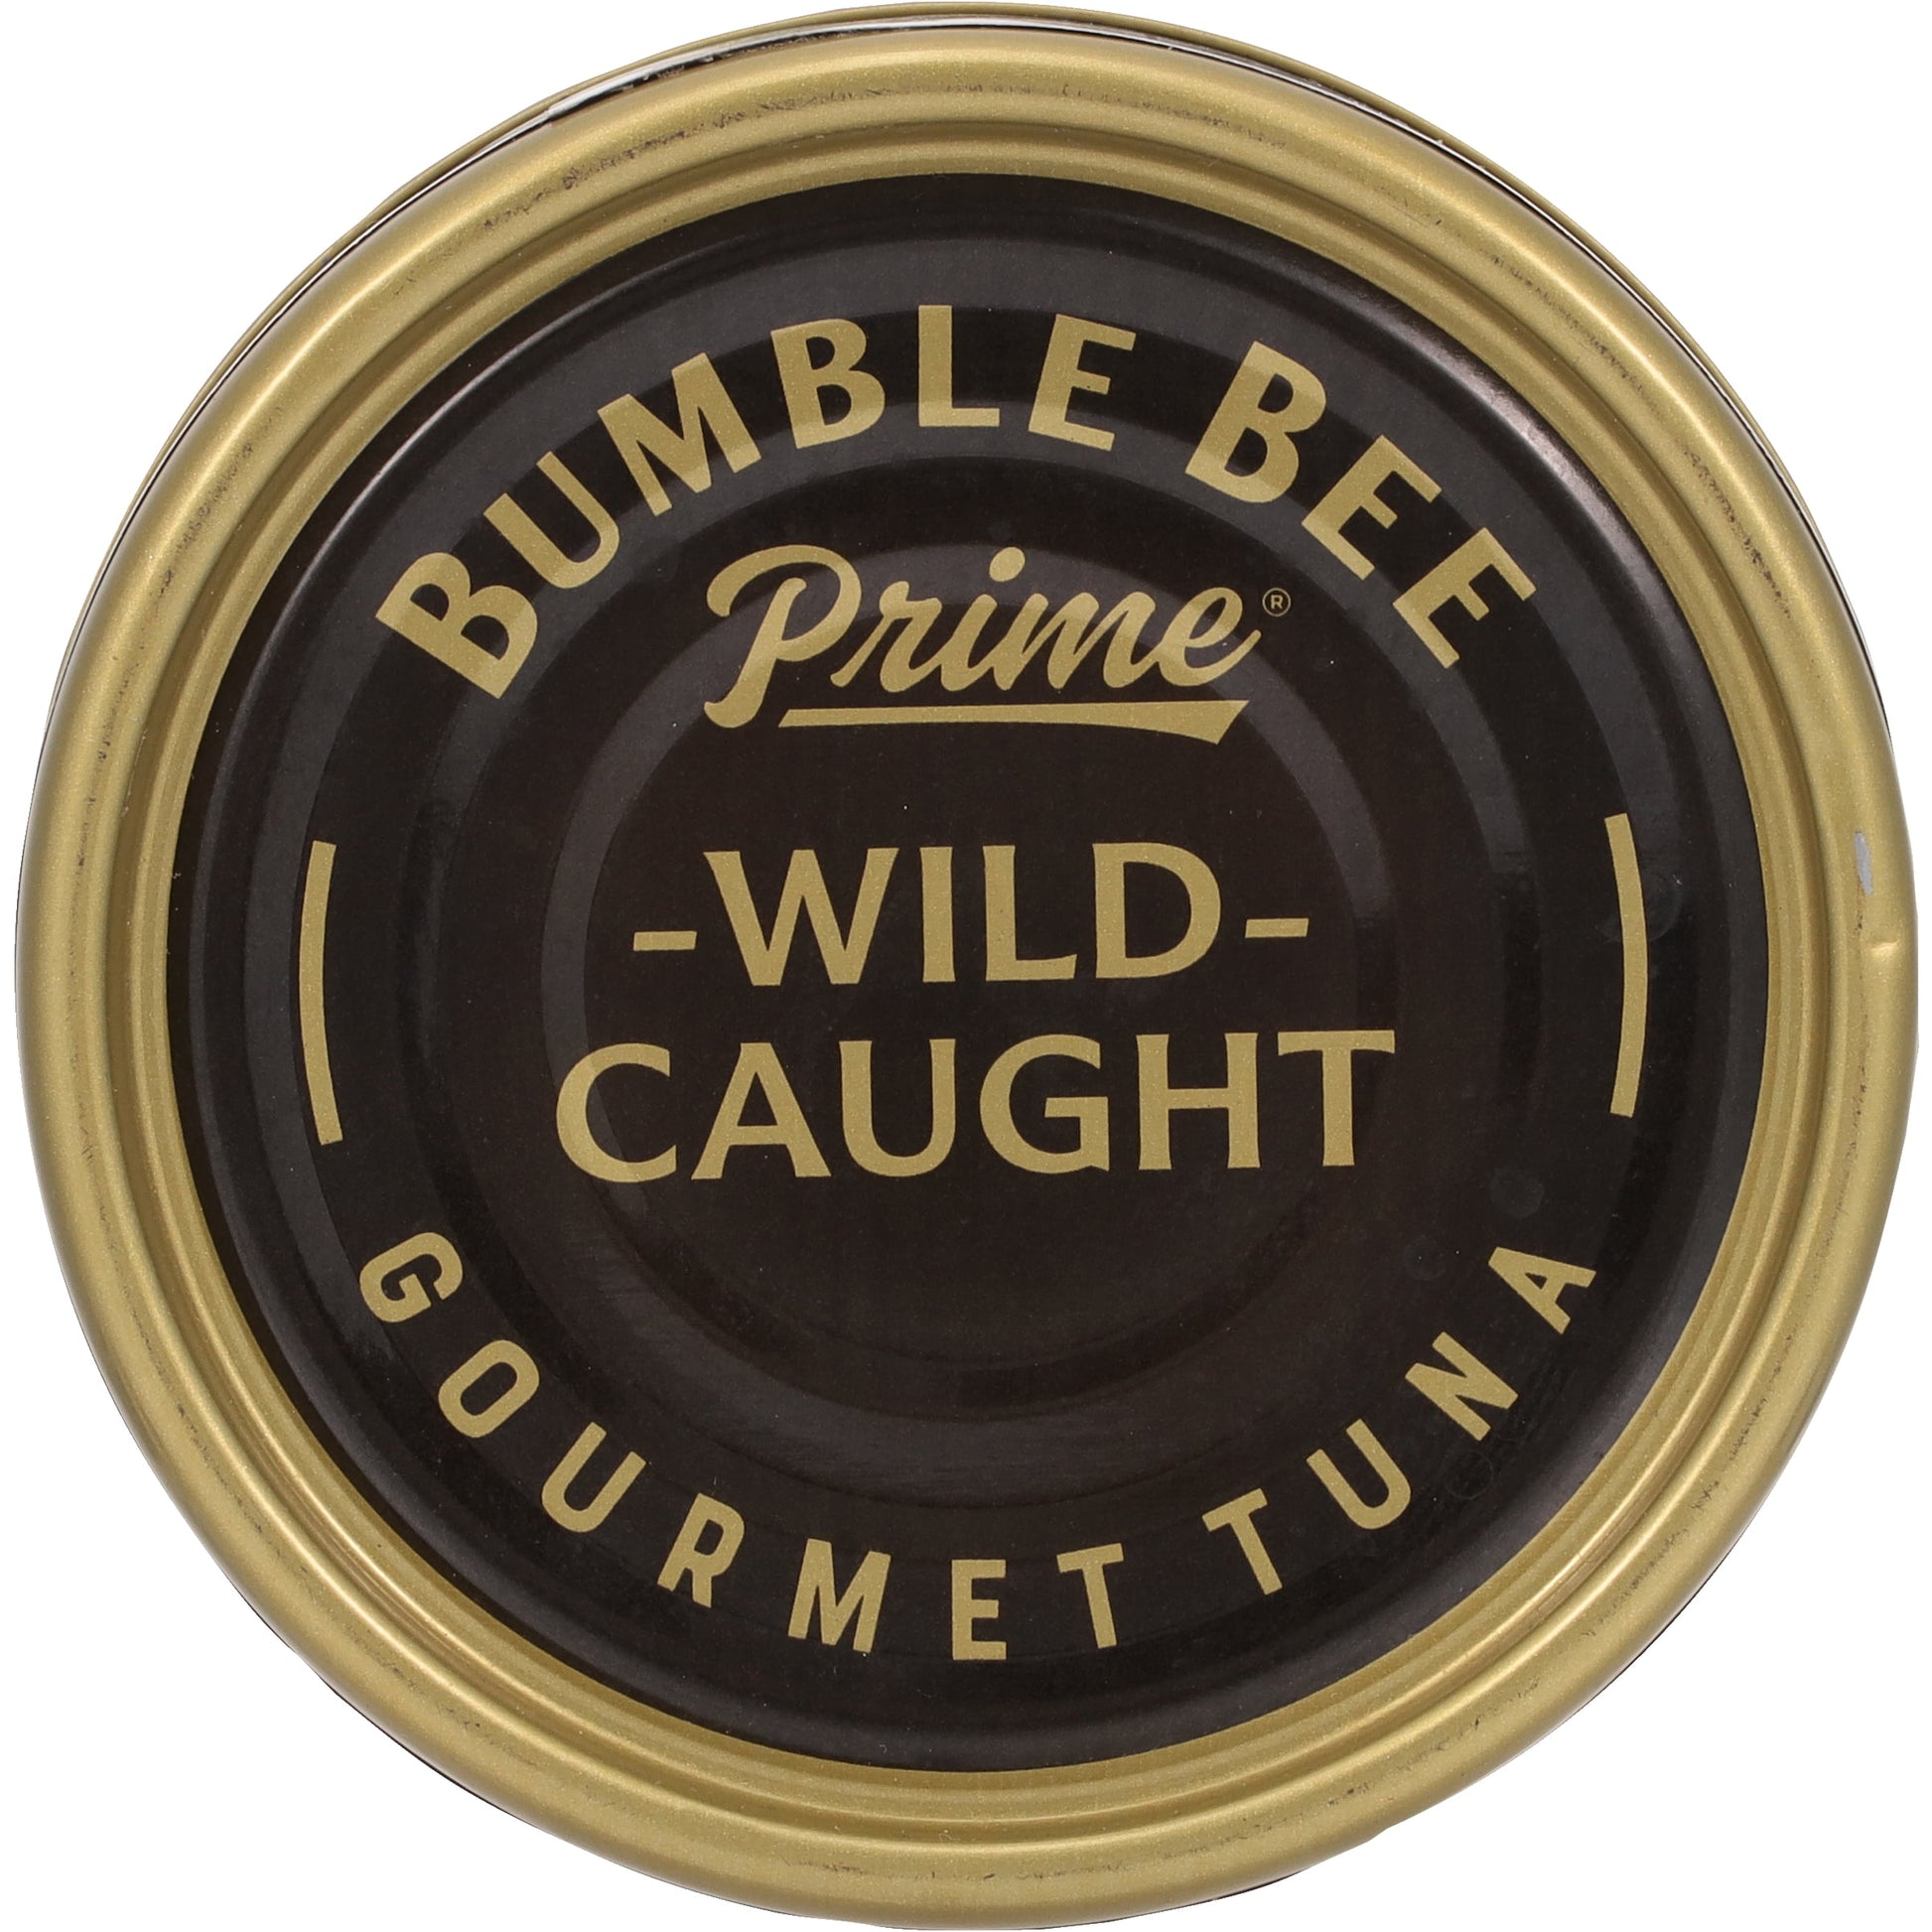 Prime Solid White Canned Albacore Tuna in Olive Oil, 5 Oz Can